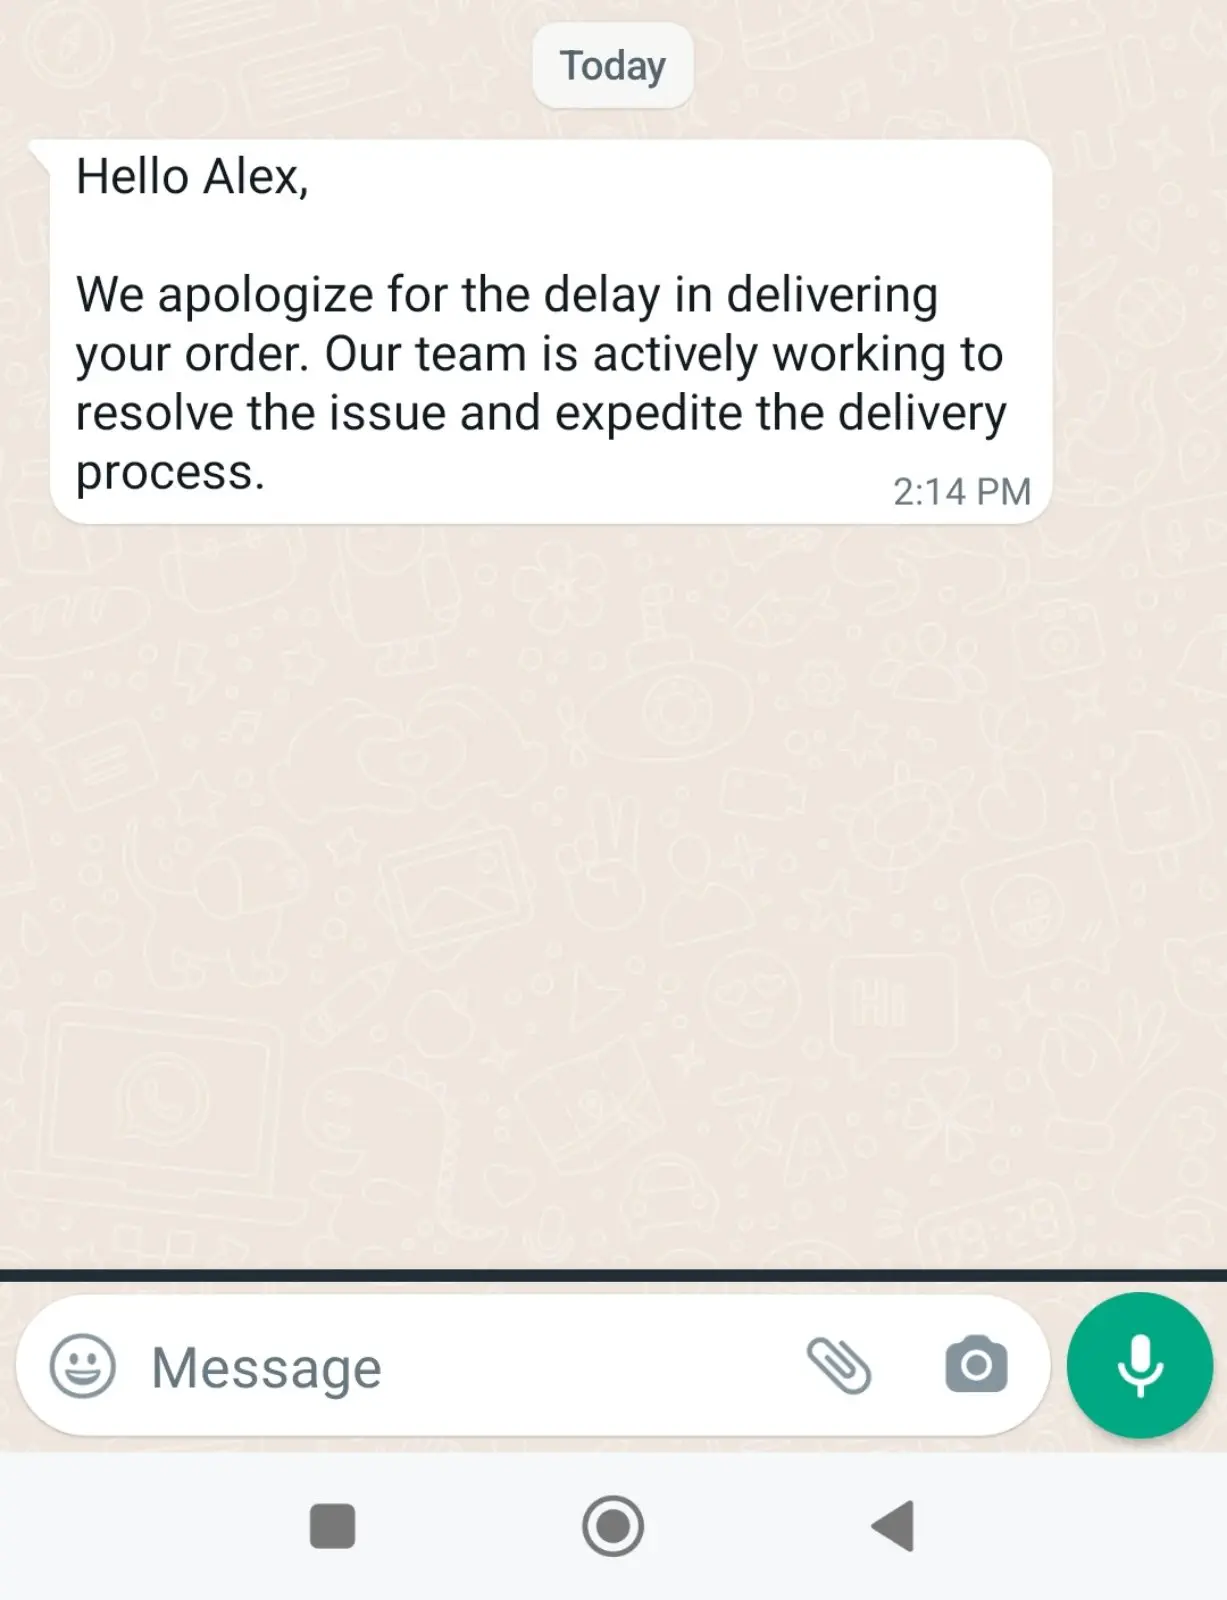 WhatsApp message with a Non-delivered order follow-up